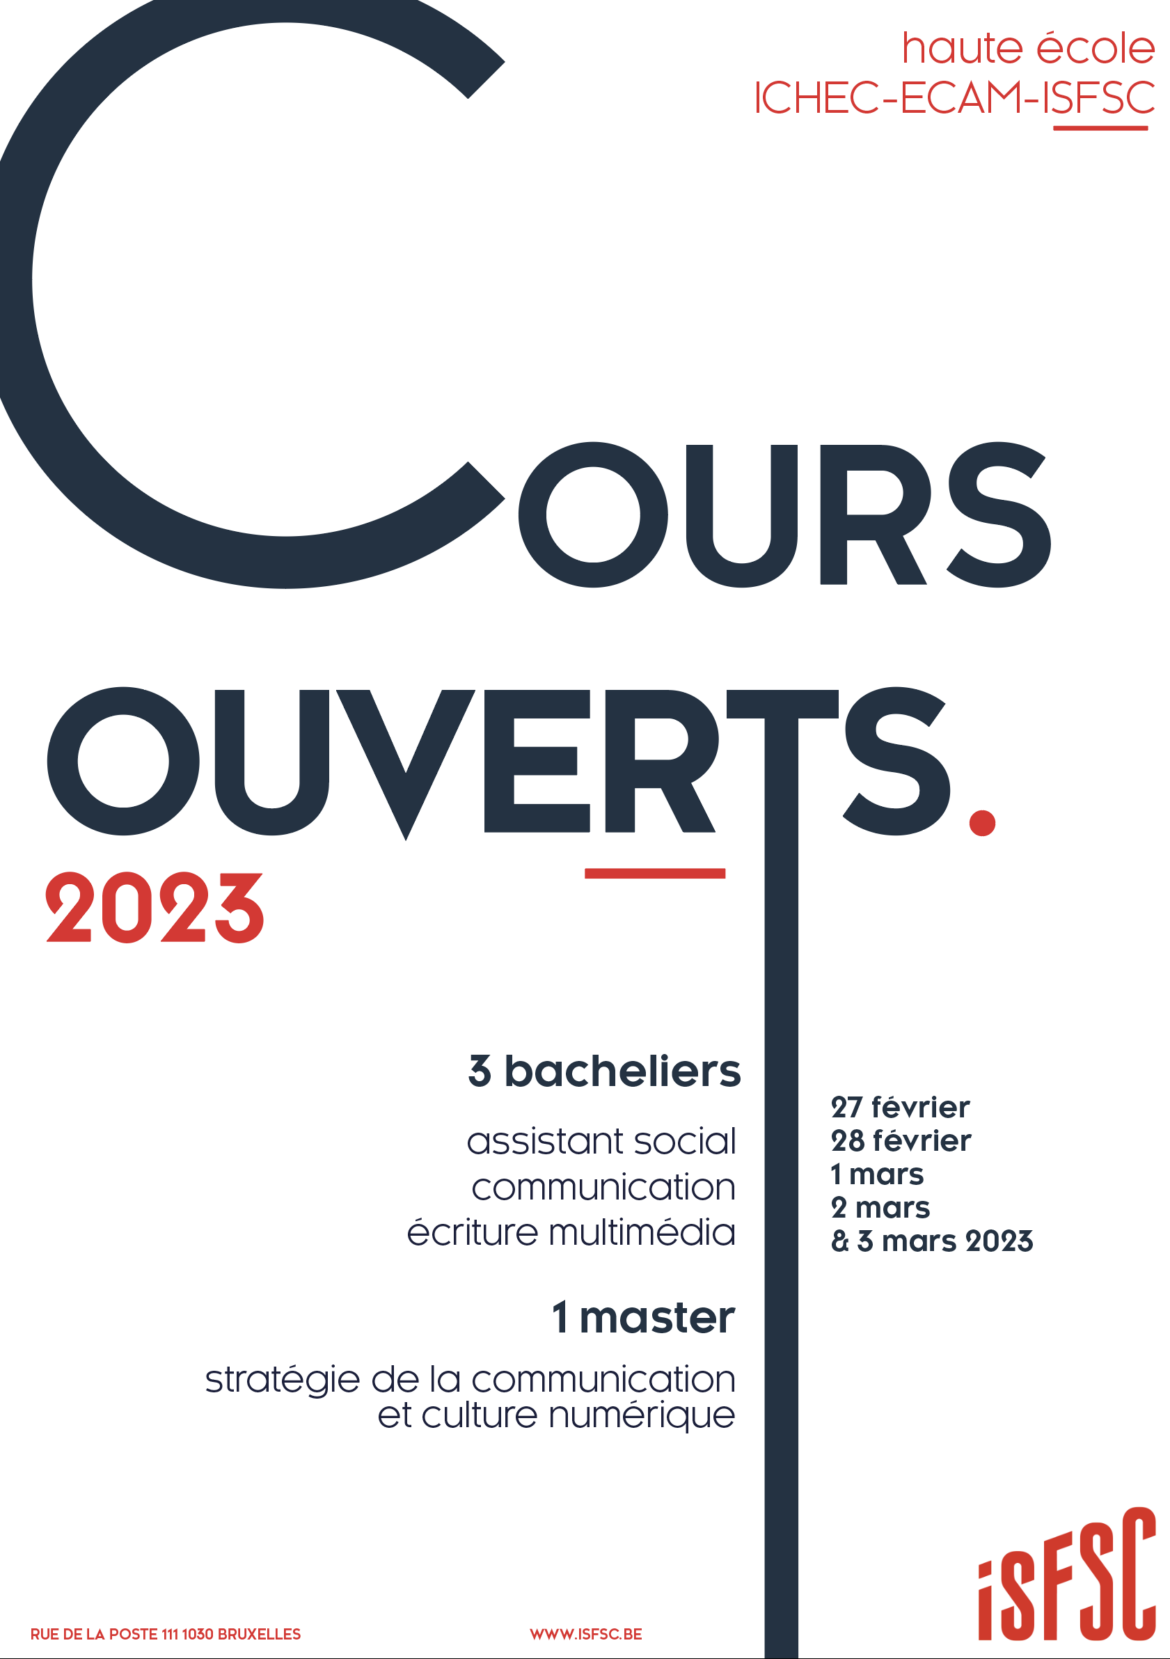 Cours-ouverts-2023-RS-.png